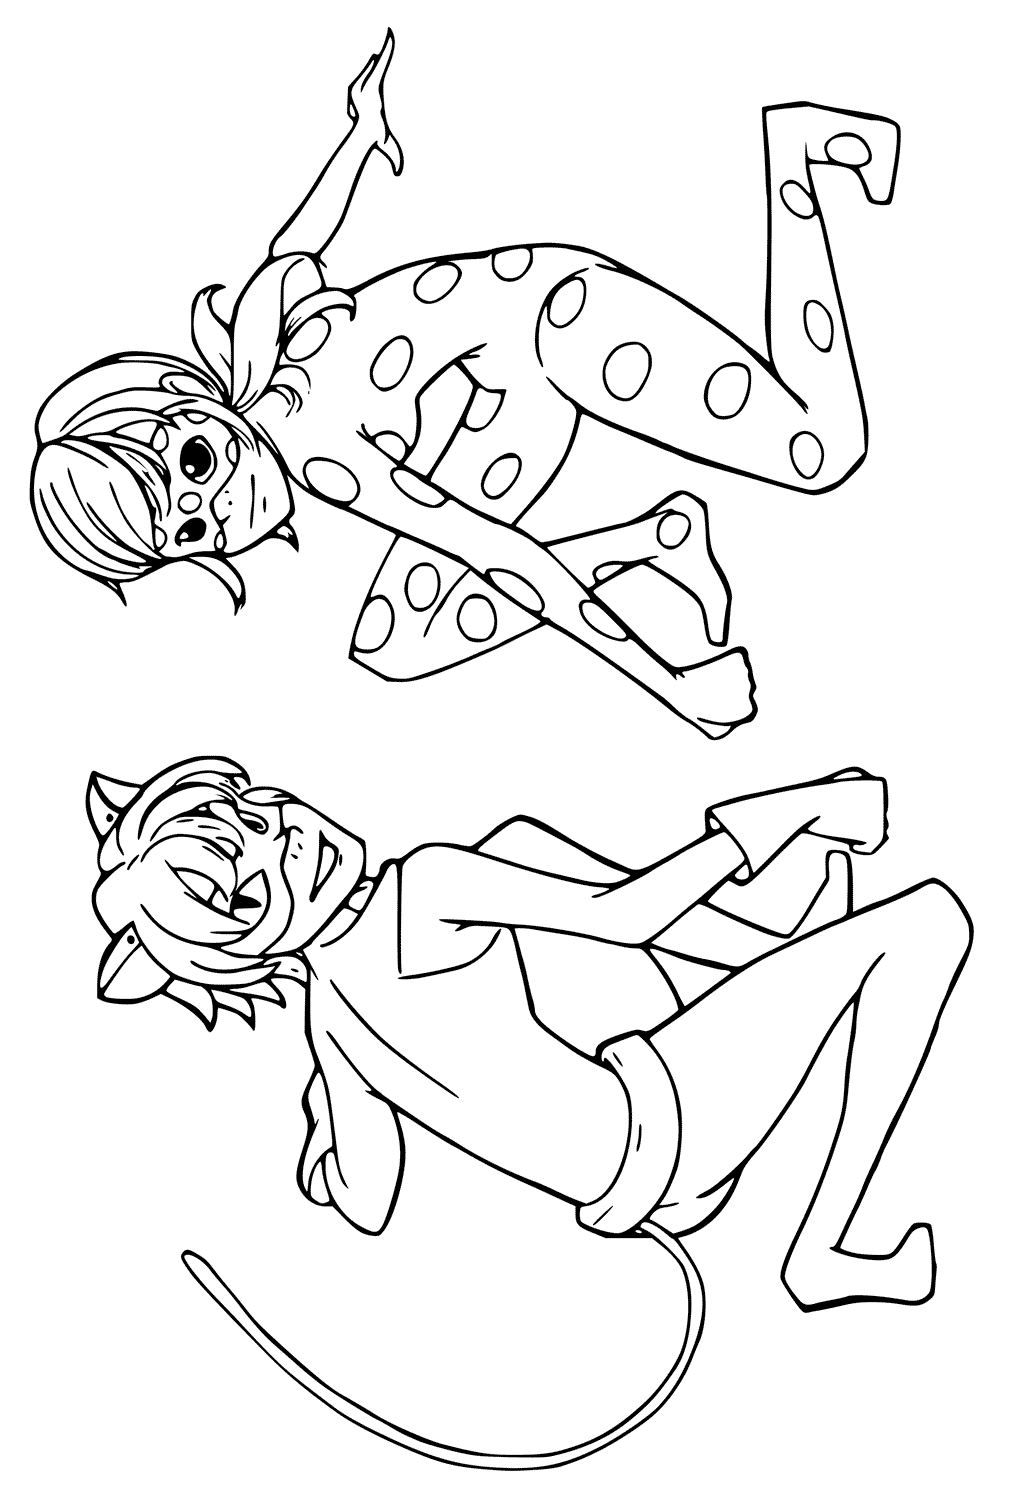 Miraculous Coloring Pages at GetDrawings | Free download